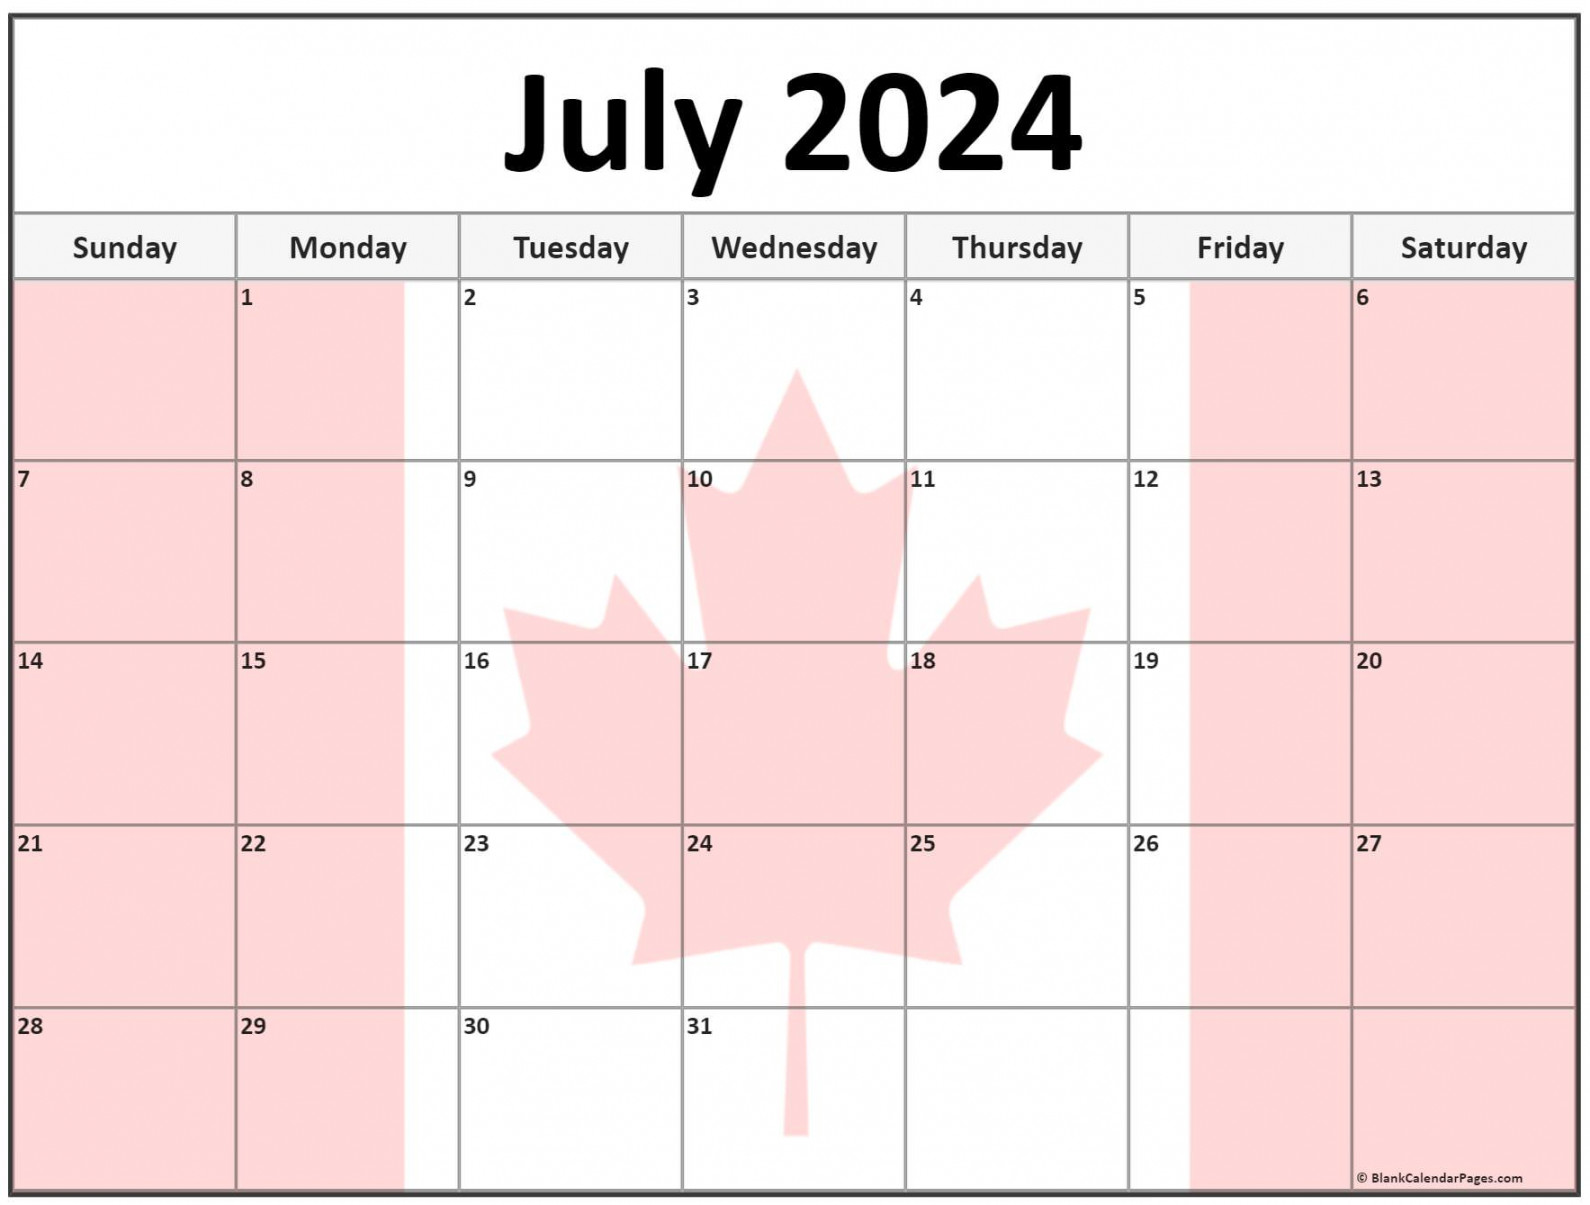 Collection of July  photo calendars with image filters.